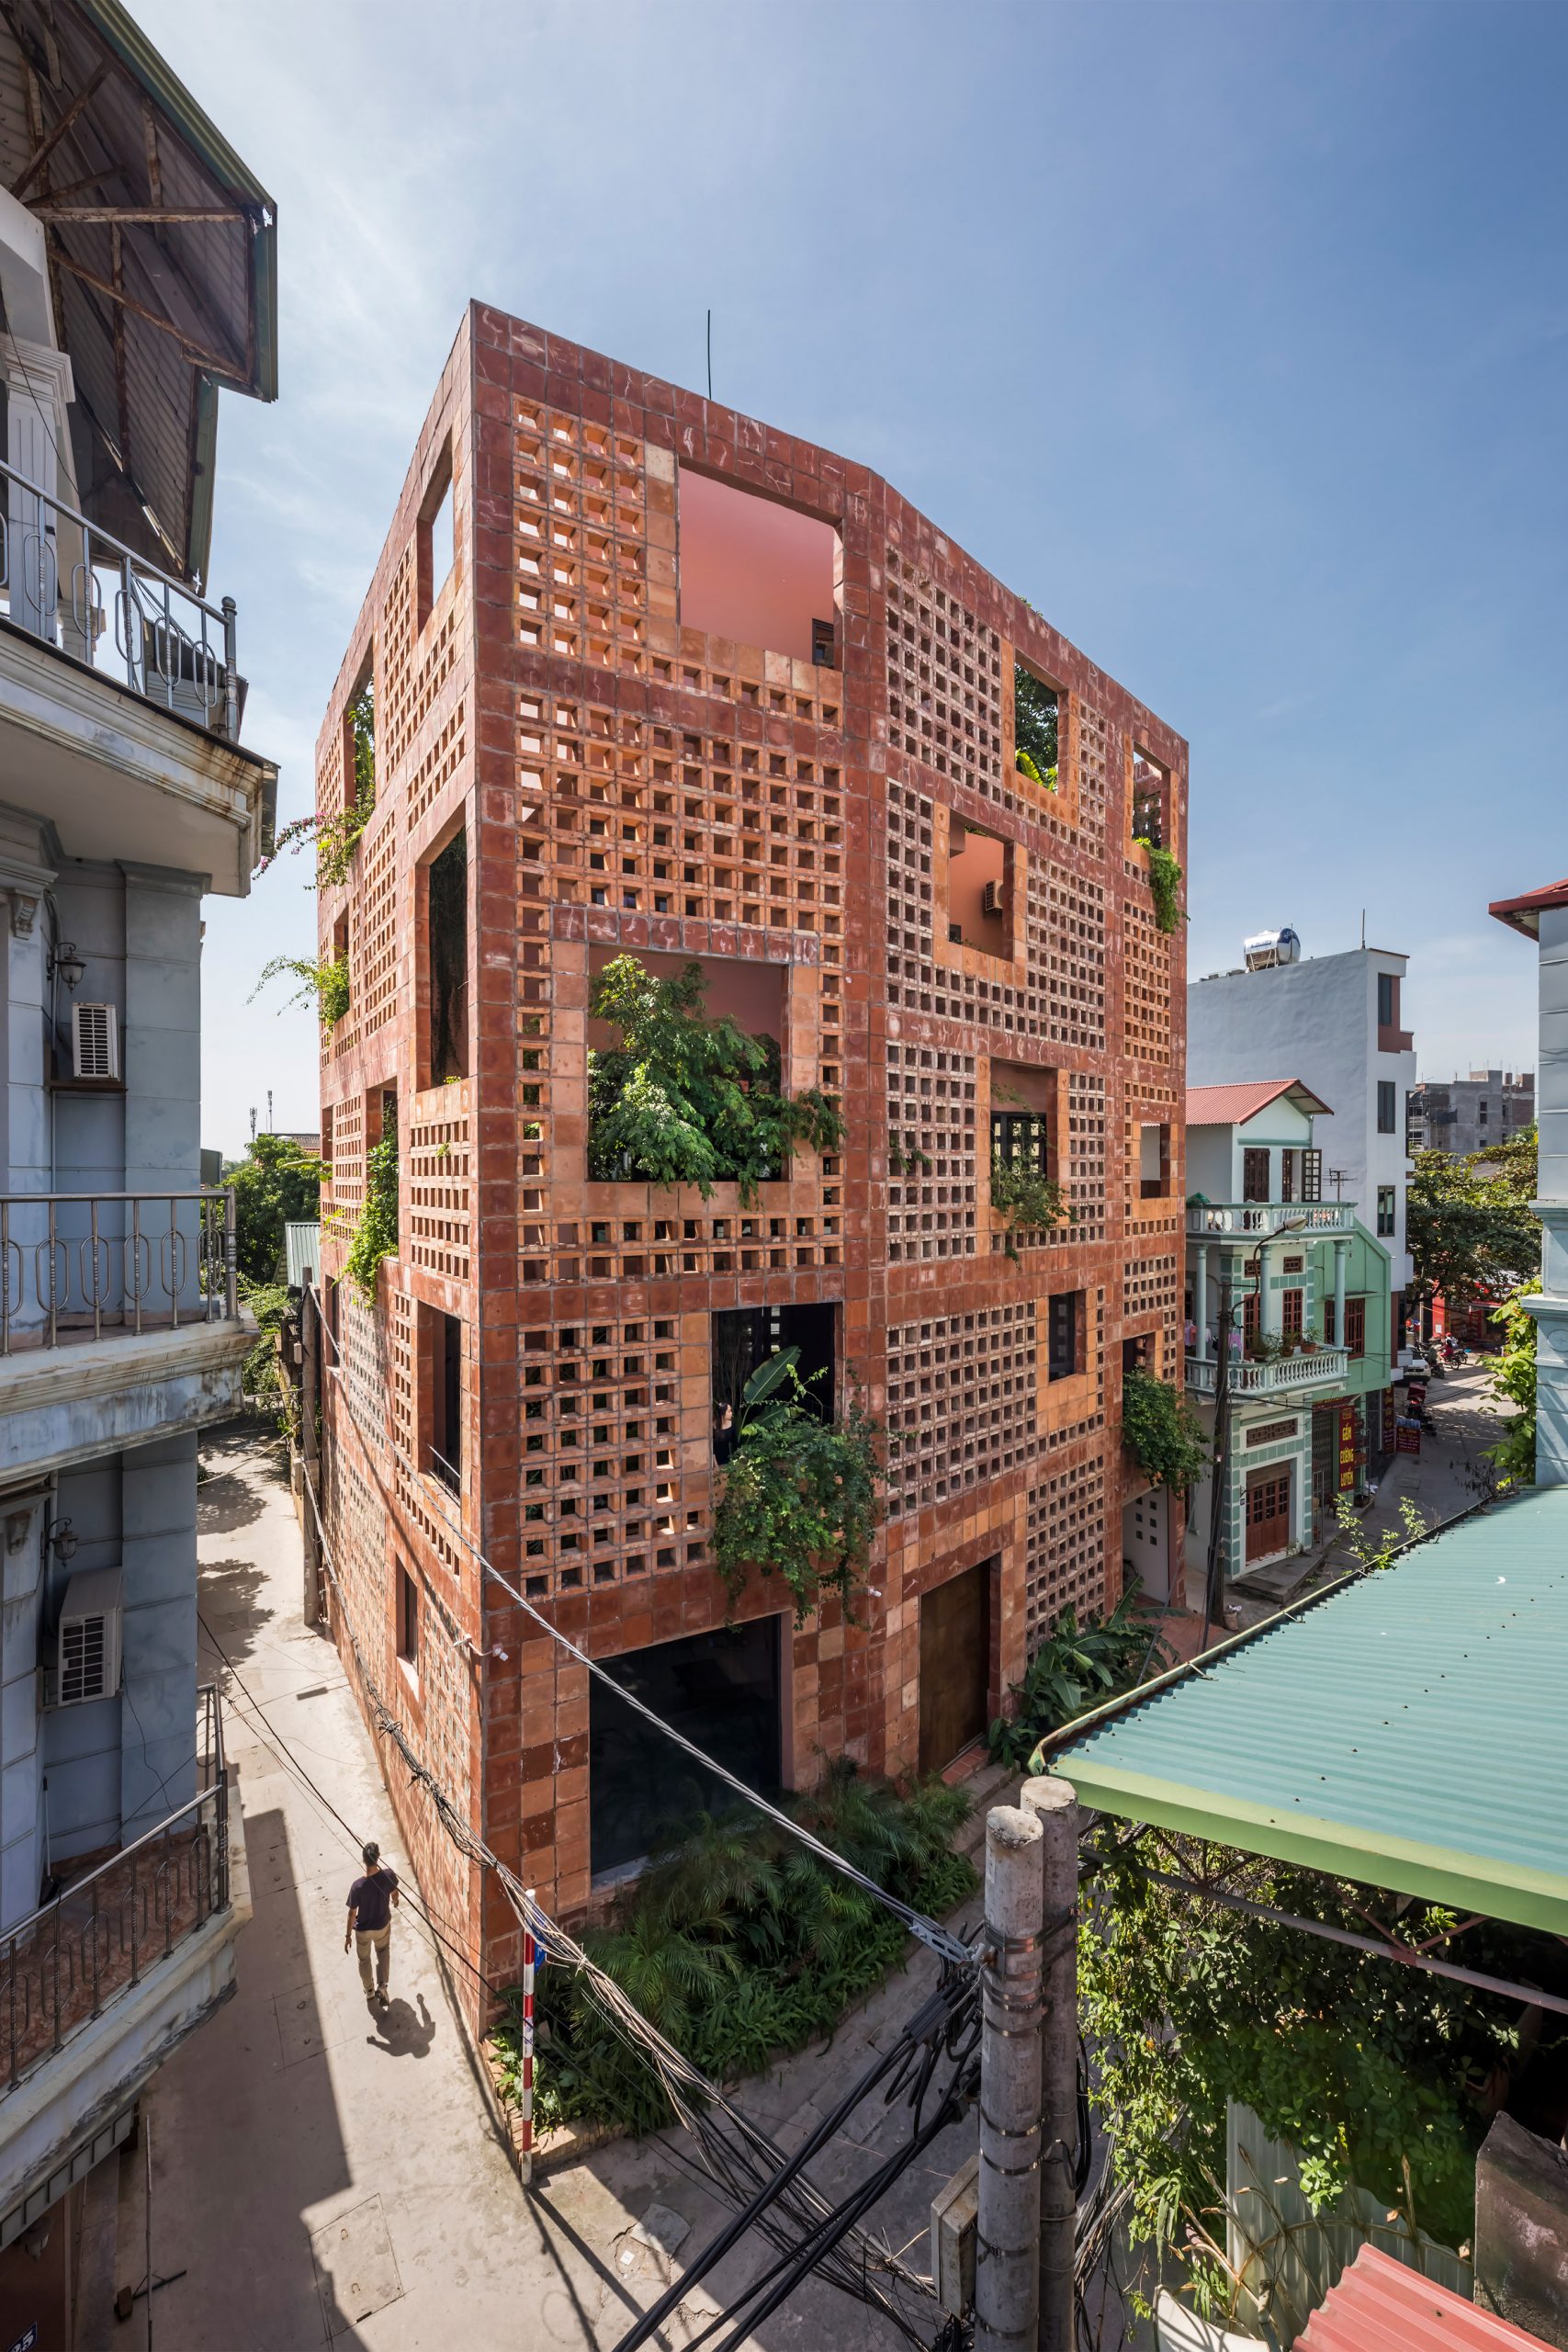 The house has a ceramic brick exterior by Vo Trong Nghia Architects